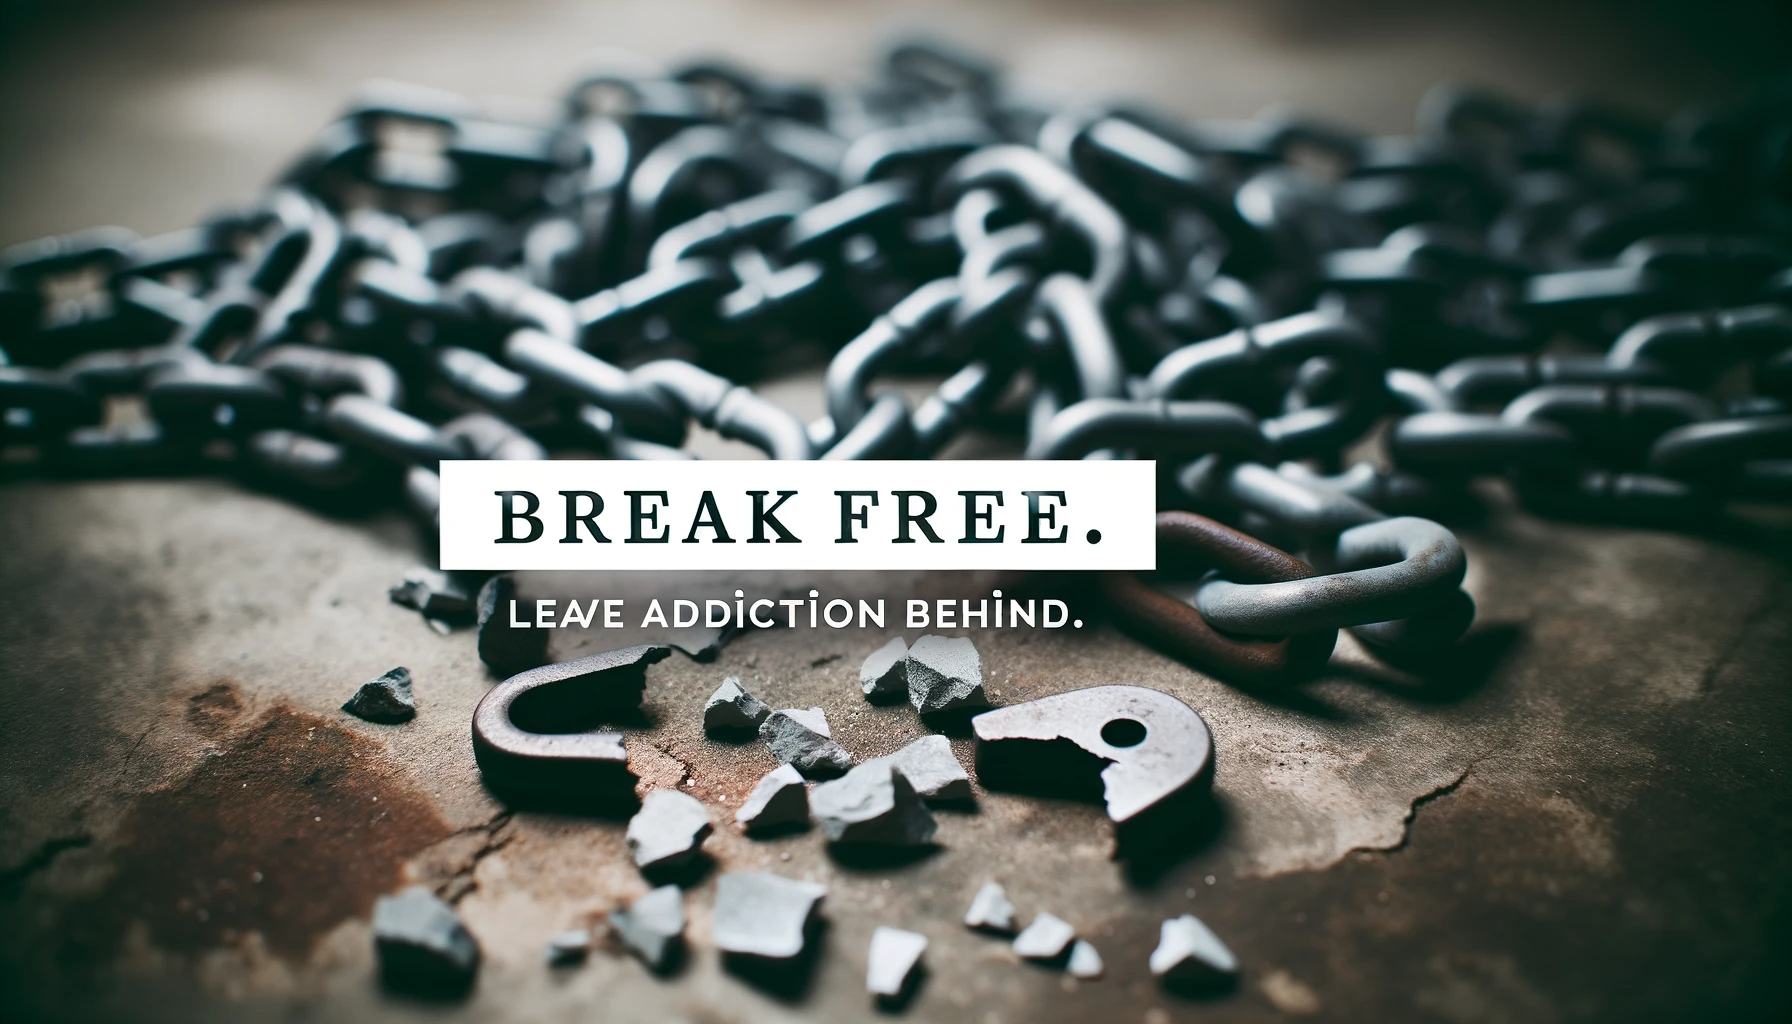 Broken chains symbolizing freedom from addiction in Saskatoon, Saskatchewan - A network of support and ongoing care ensuring long-term recovery in drug and alcohol treatment in Saskatoon, Saskatchewan.